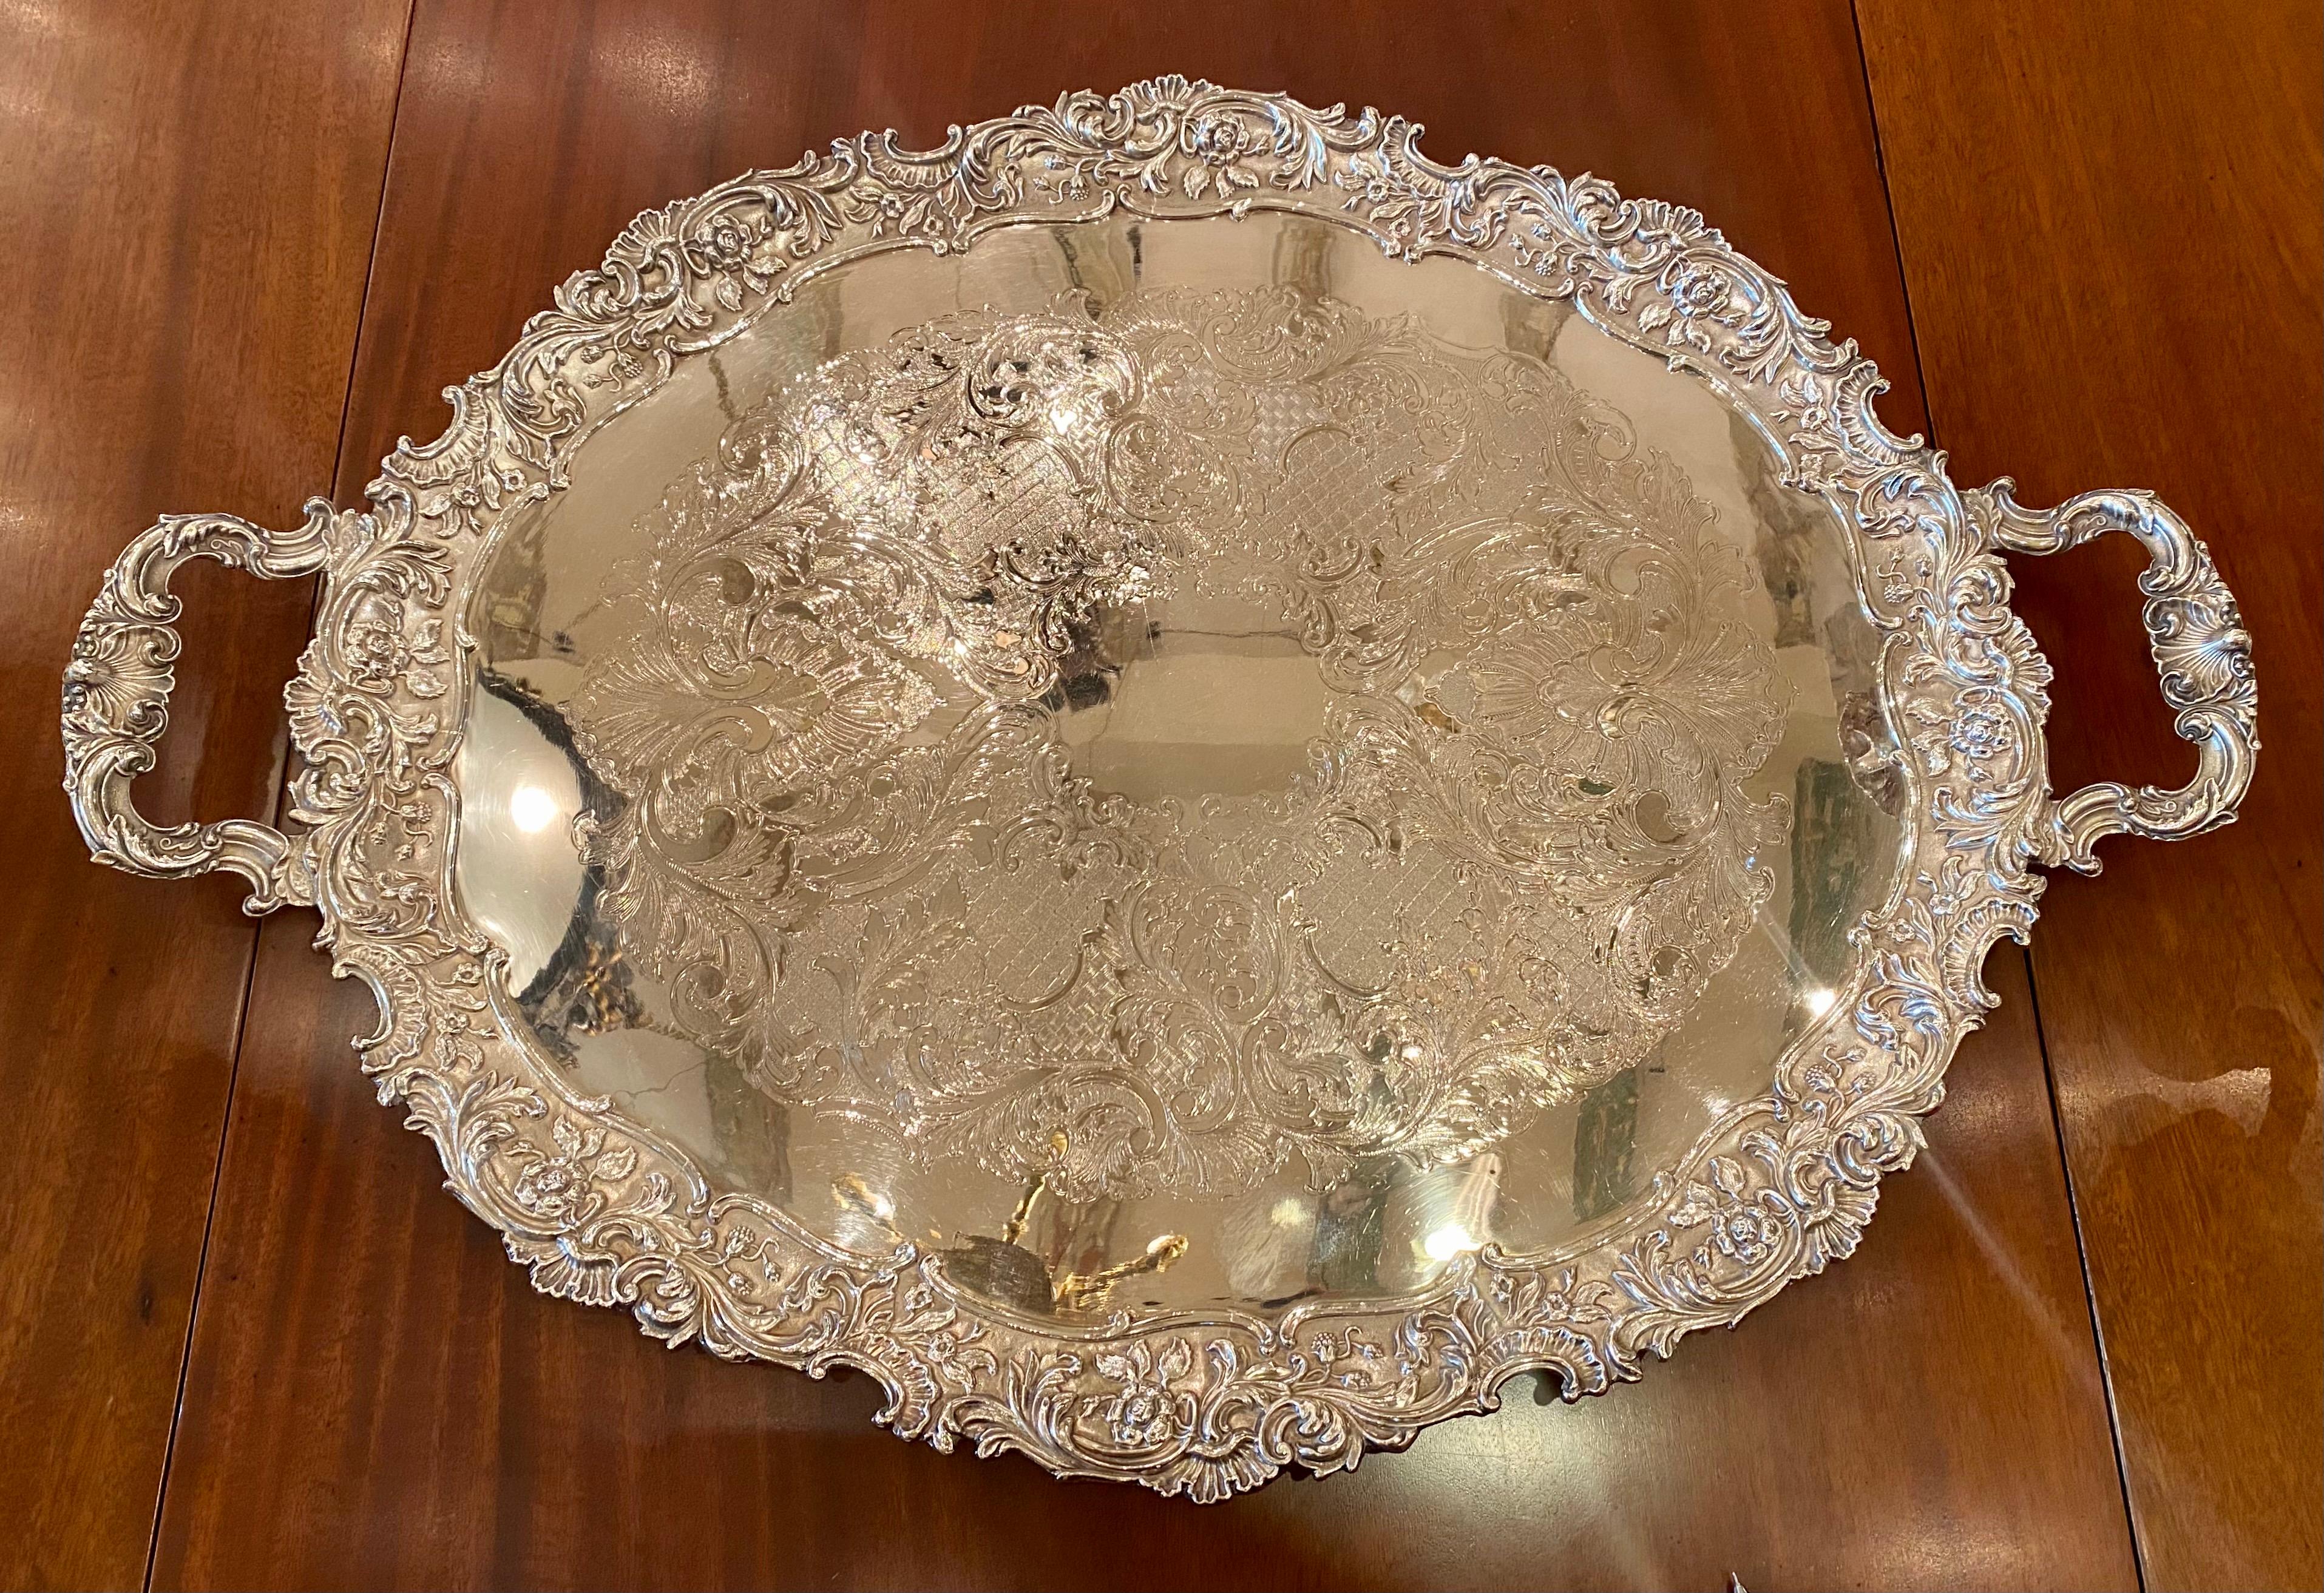 Large antique English Hallmarked Sheffield silver-plate service tray, Circa 1900-1910.